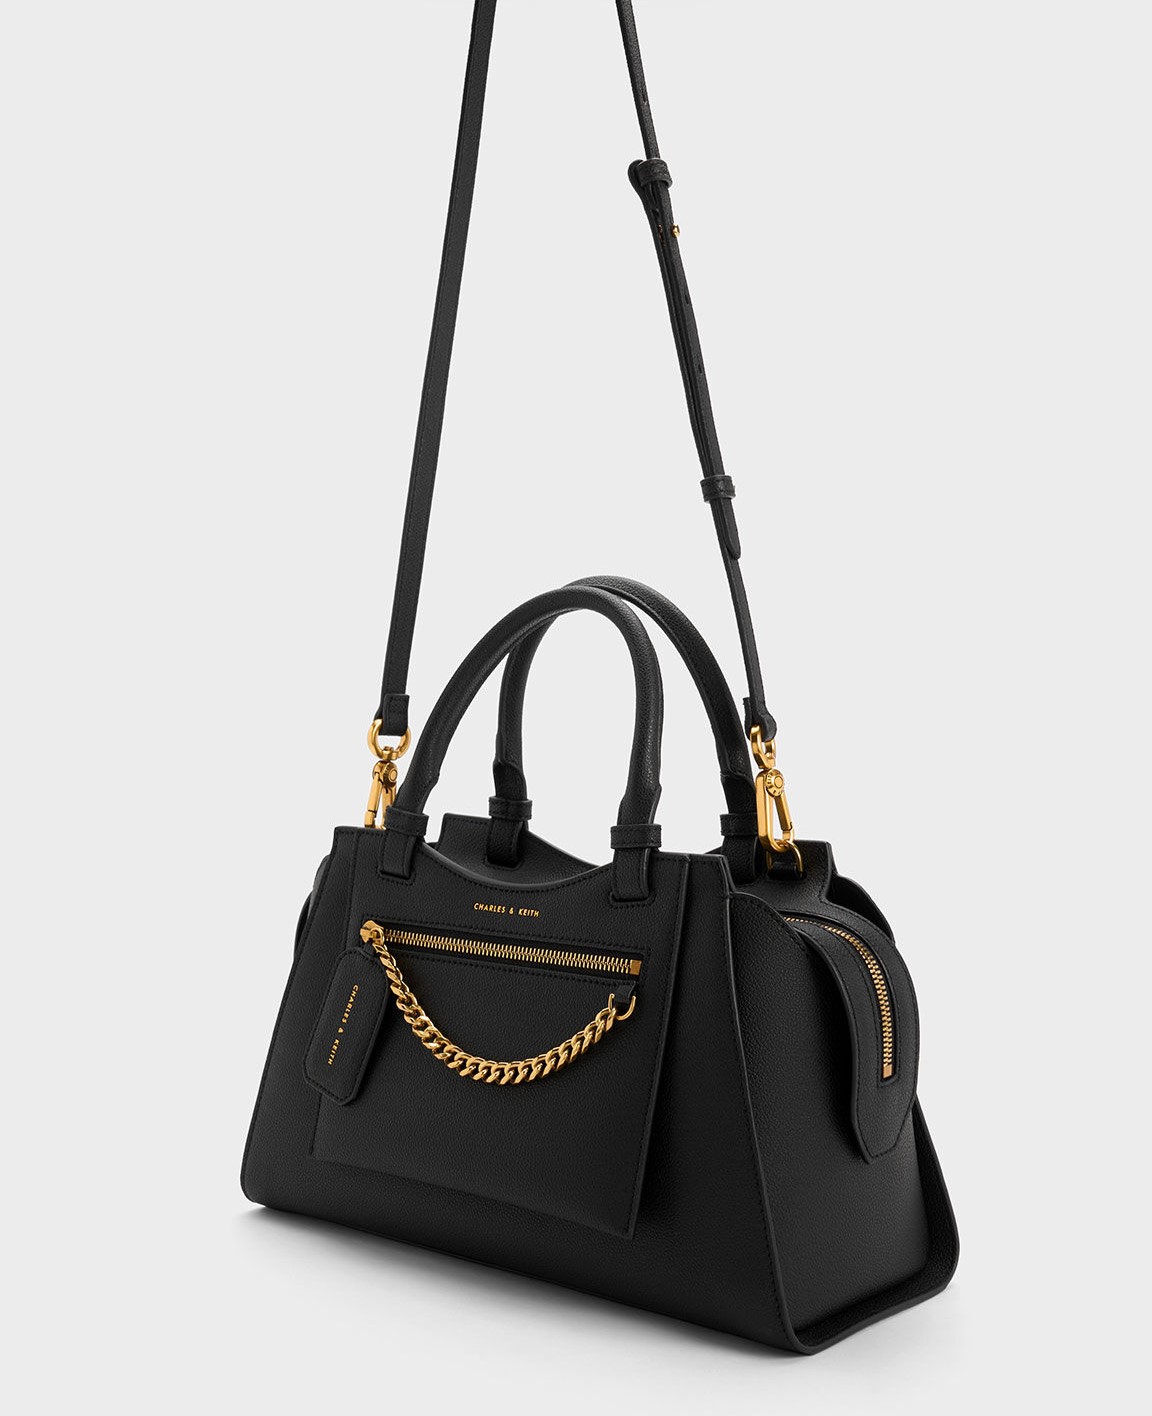 TÚI XÁCH CHARLES AND KEITH AVIS TRAPEZE TOTE BAG CK2-30671492 12